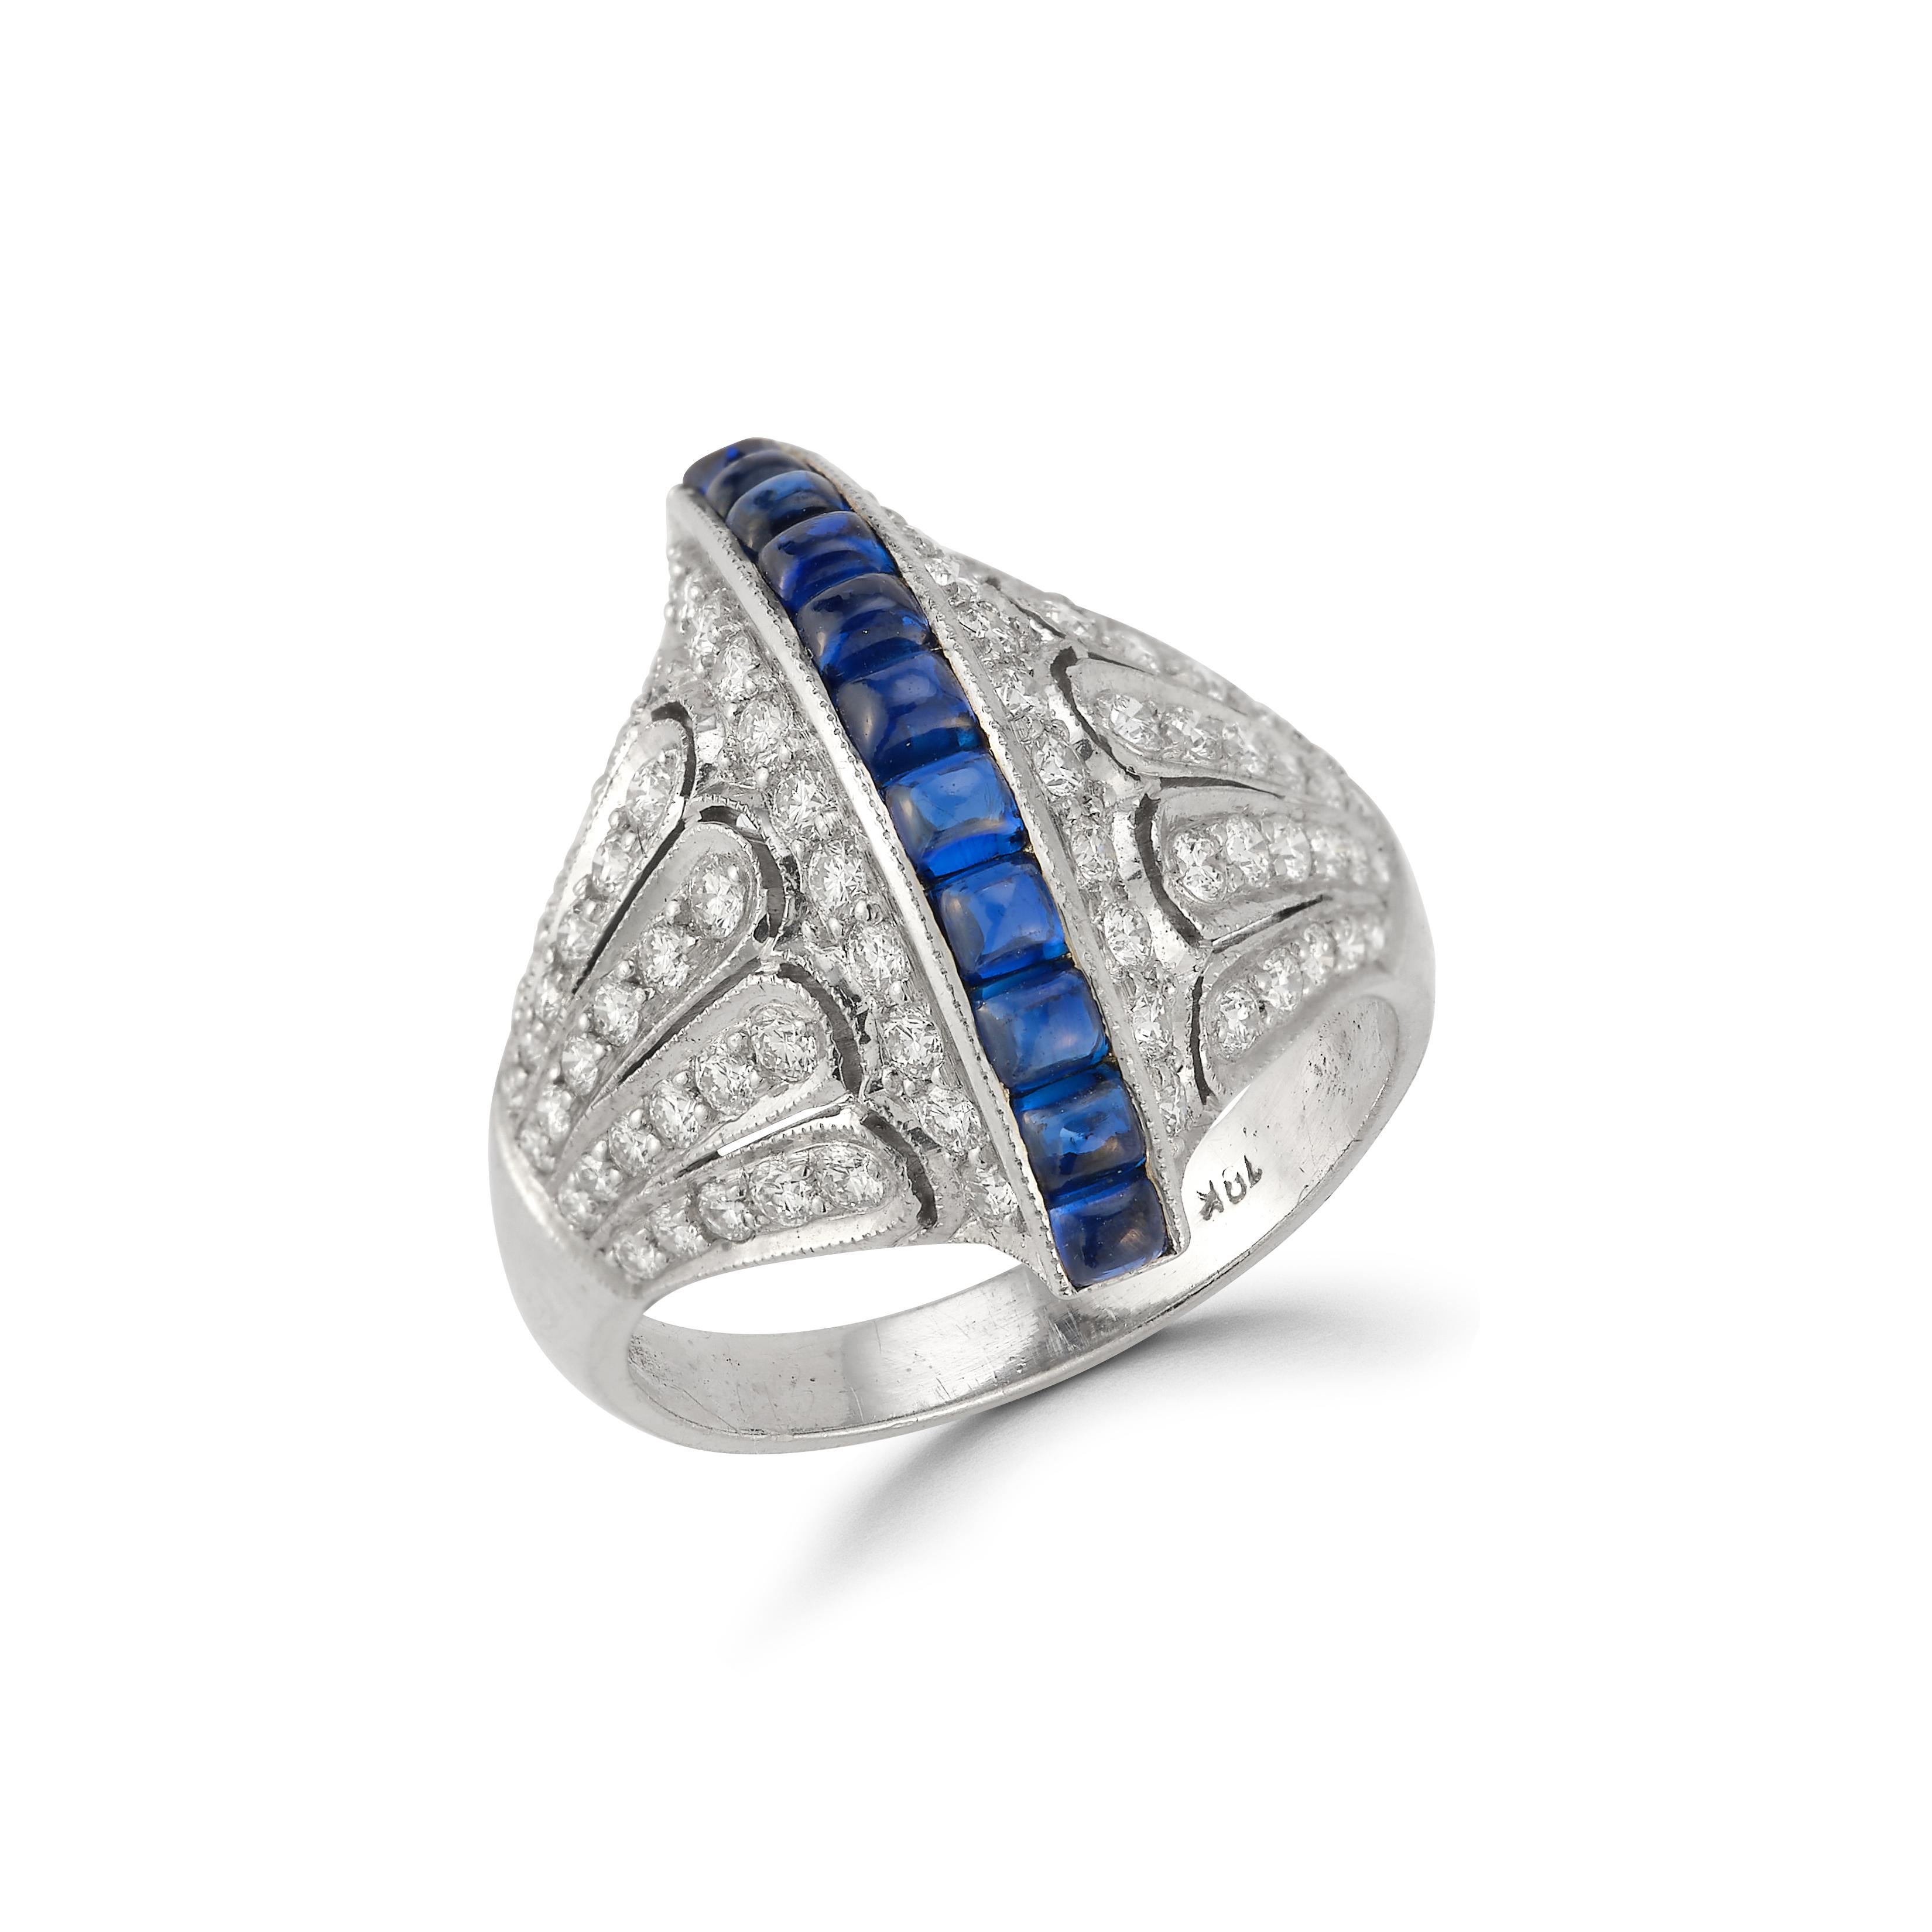 Sapphire Row & Diamond Ring 

18k white gold ring set with a center row of 11 buff cut cabochon sapphires surrounded by 78 round diamonds

Approximate Diamond total weight: 1 carat
Approximate Sapphire total weight: 1.75 carats 

Ring Size: